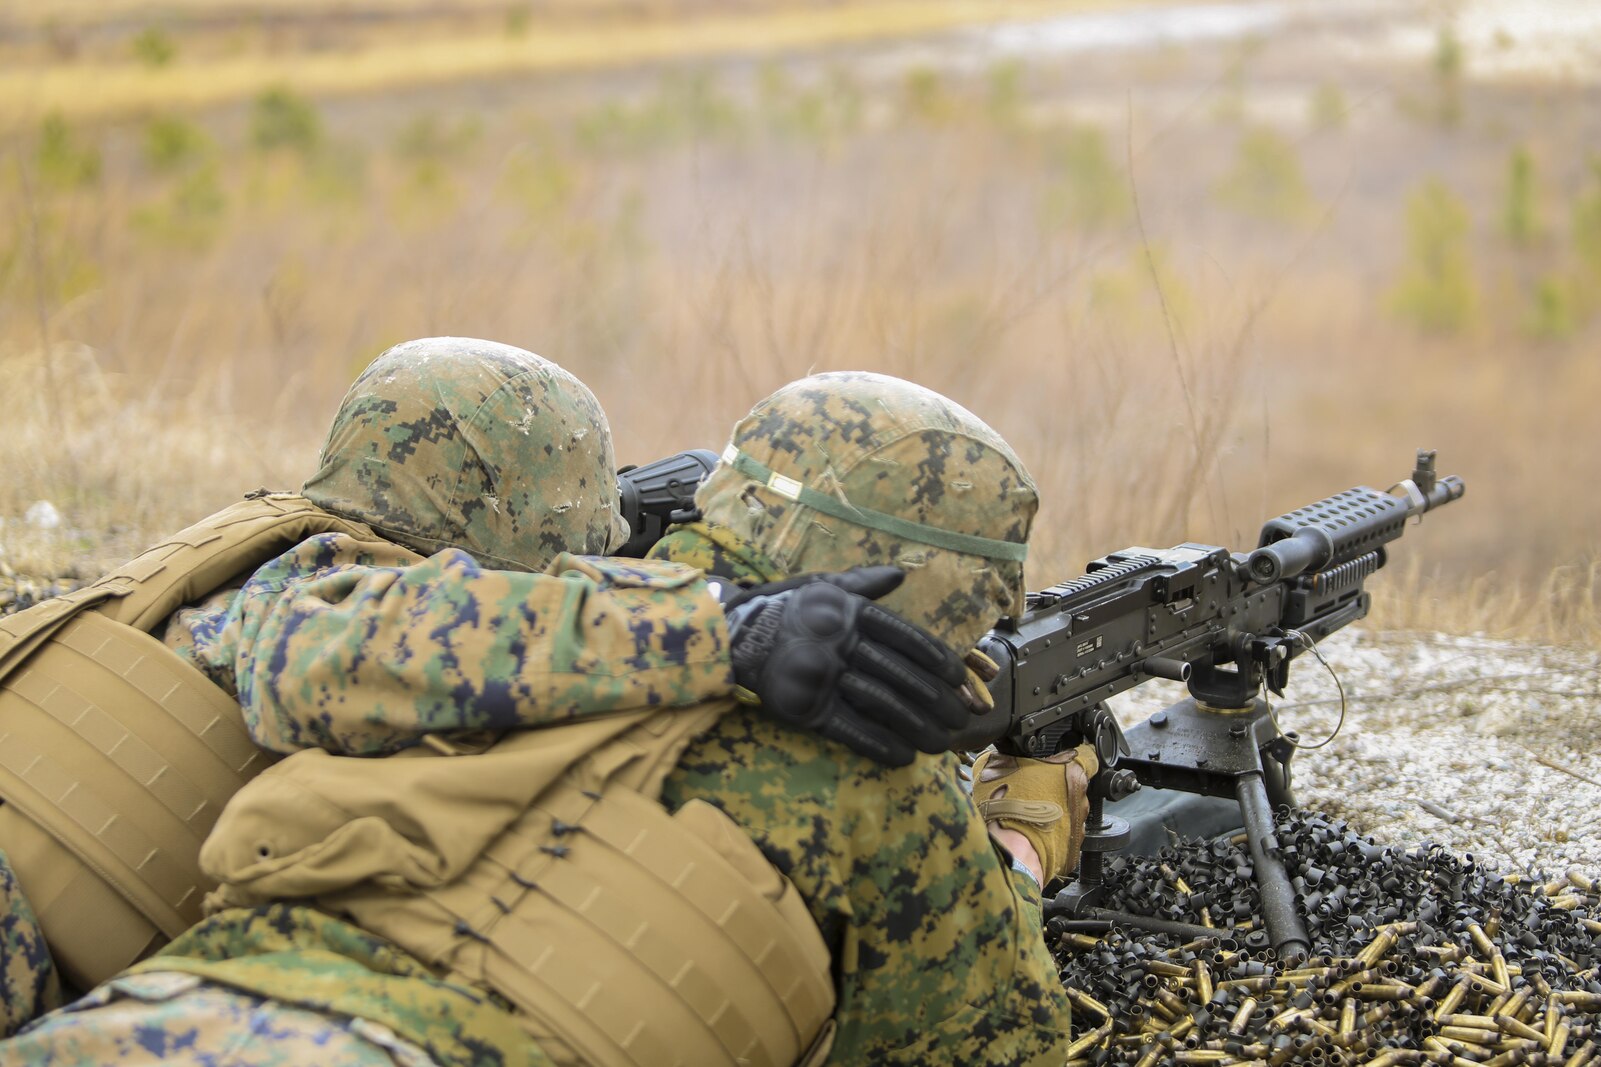 Marines with Bravo Company, 2nd Law Enforcement Battalion, participated in familiarization training at Camp Lejeune, N.C., March 4, 2016, in order to improve their marksmanship skills with the M240 machine gun and M249 squad automatic weapon. The purpose of the shoot was to hone their accuracy, communication abilities and suppressive fire capabilities in order to prepare the unit for several upcoming training exercises. (U.S. Marine Corps photo by Lance Cpl. Aaron K. Fiala/Released)